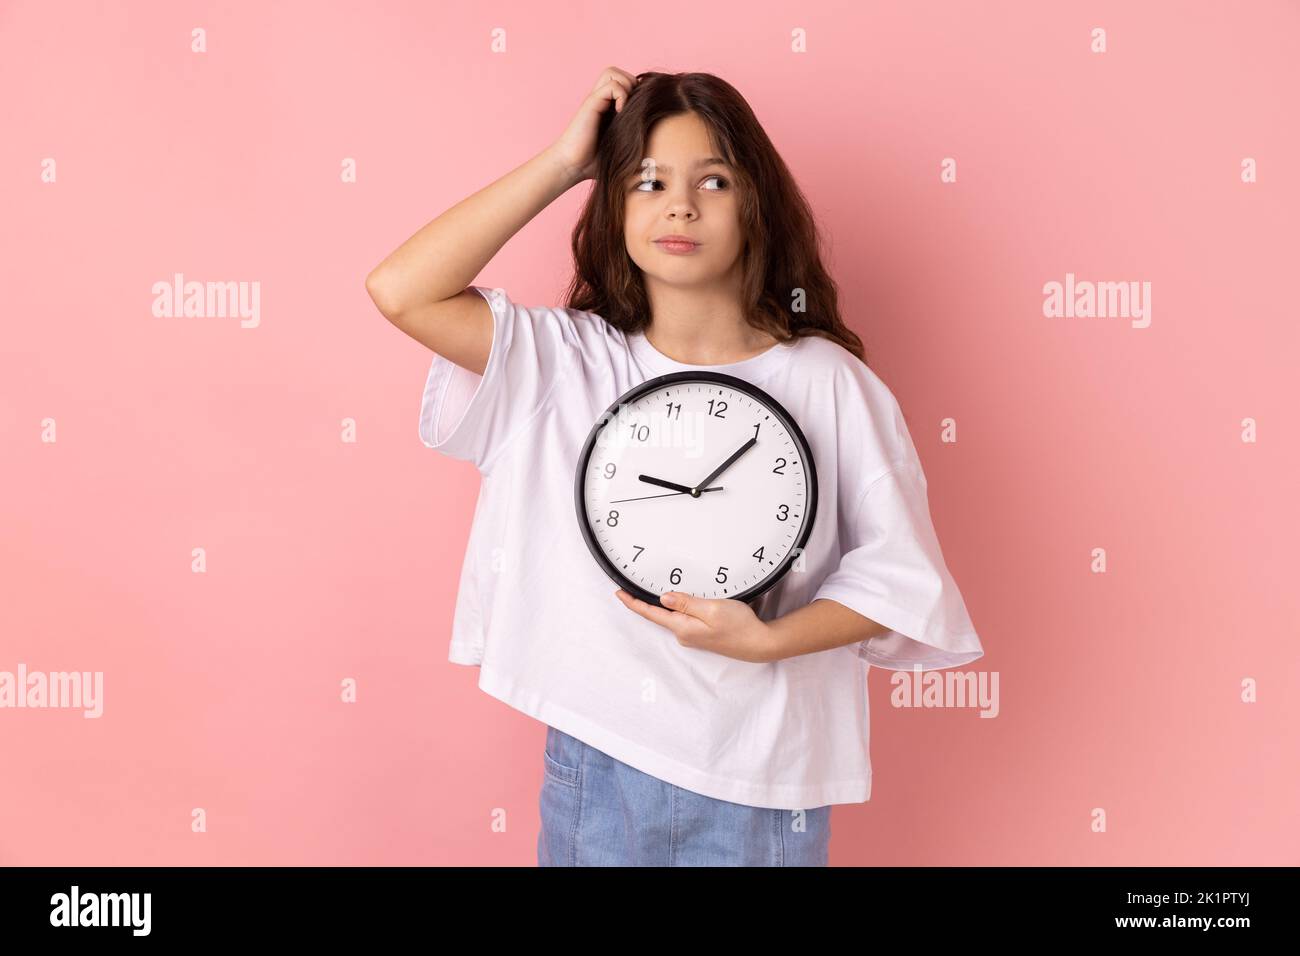 Portrait of confused puzzled little girl wearing white T-shirt holding wall clock and scratching her head, deadline, punctuality. Indoor studio shot isolated on pink background. Stock Photo